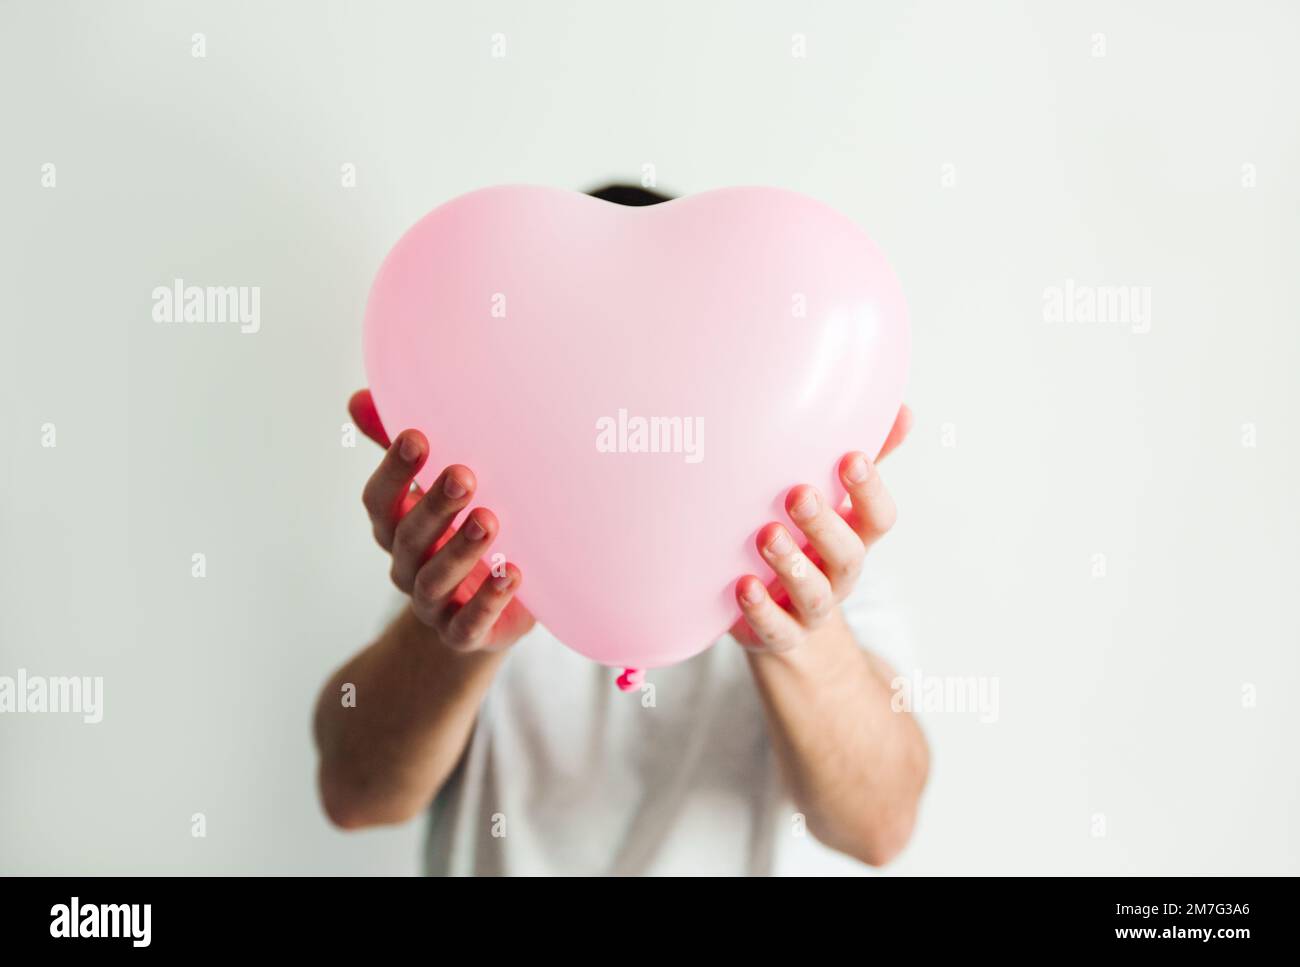 Pink inflatable heart-shaped balloon in hand. White background. Stock Photo